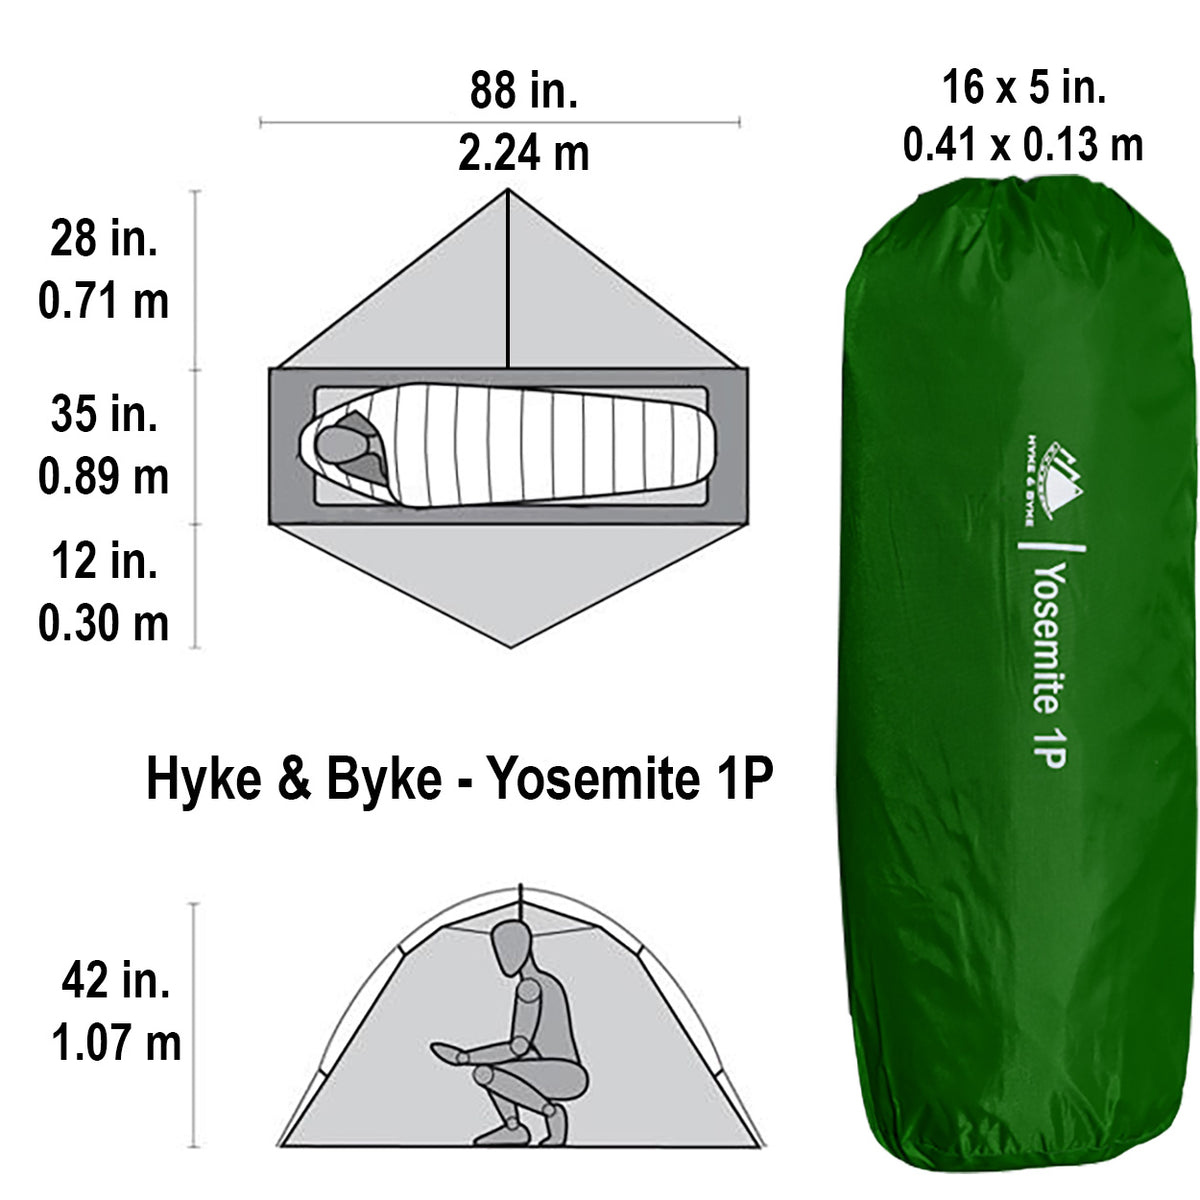 Hyke ＆ Byke Zion Hiking ＆ Backpacking Tent Season Ultralight,  Waterproof Tent for Camping w/Rain Fly and Footprint Person Forest 